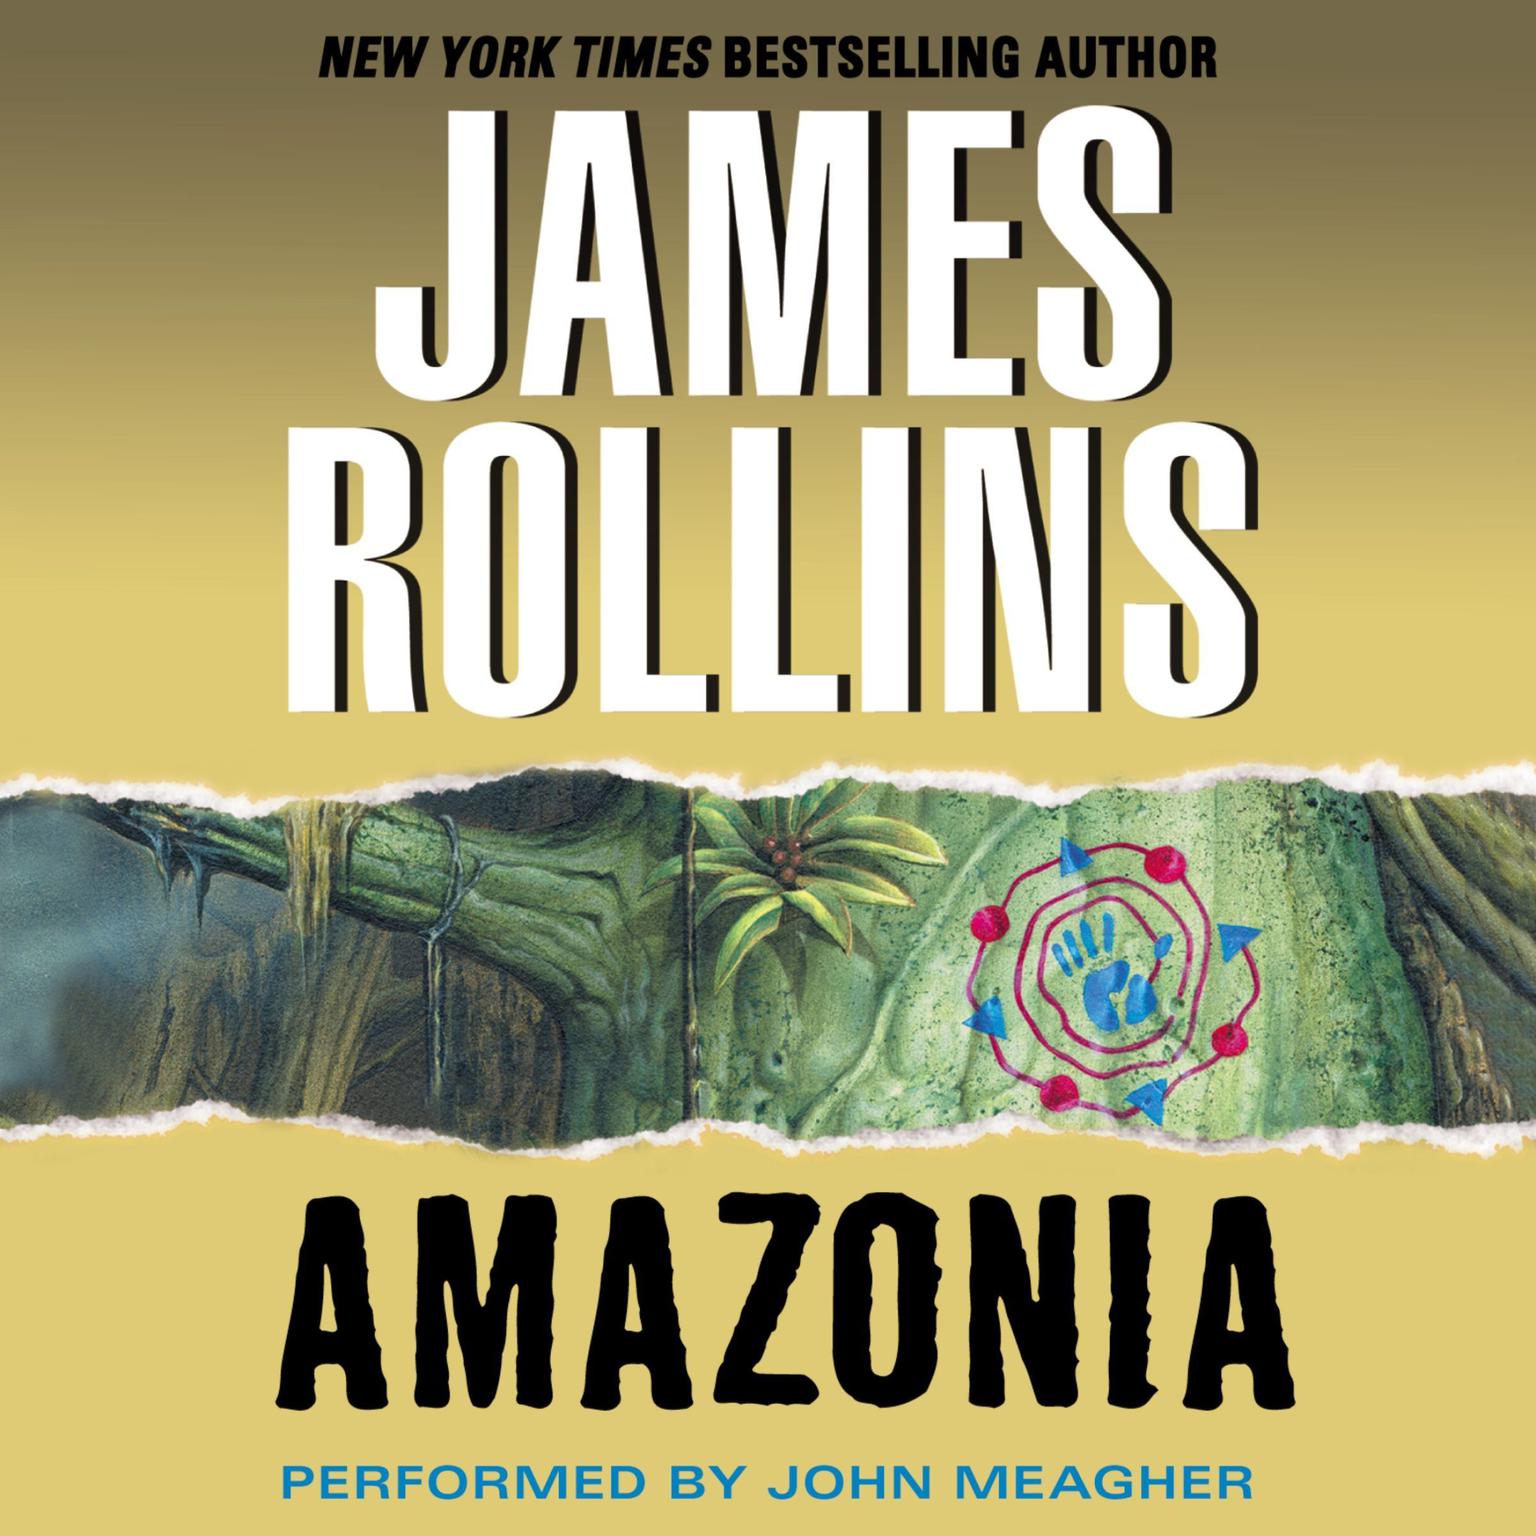 Amazonia Audiobook, by James Rollins